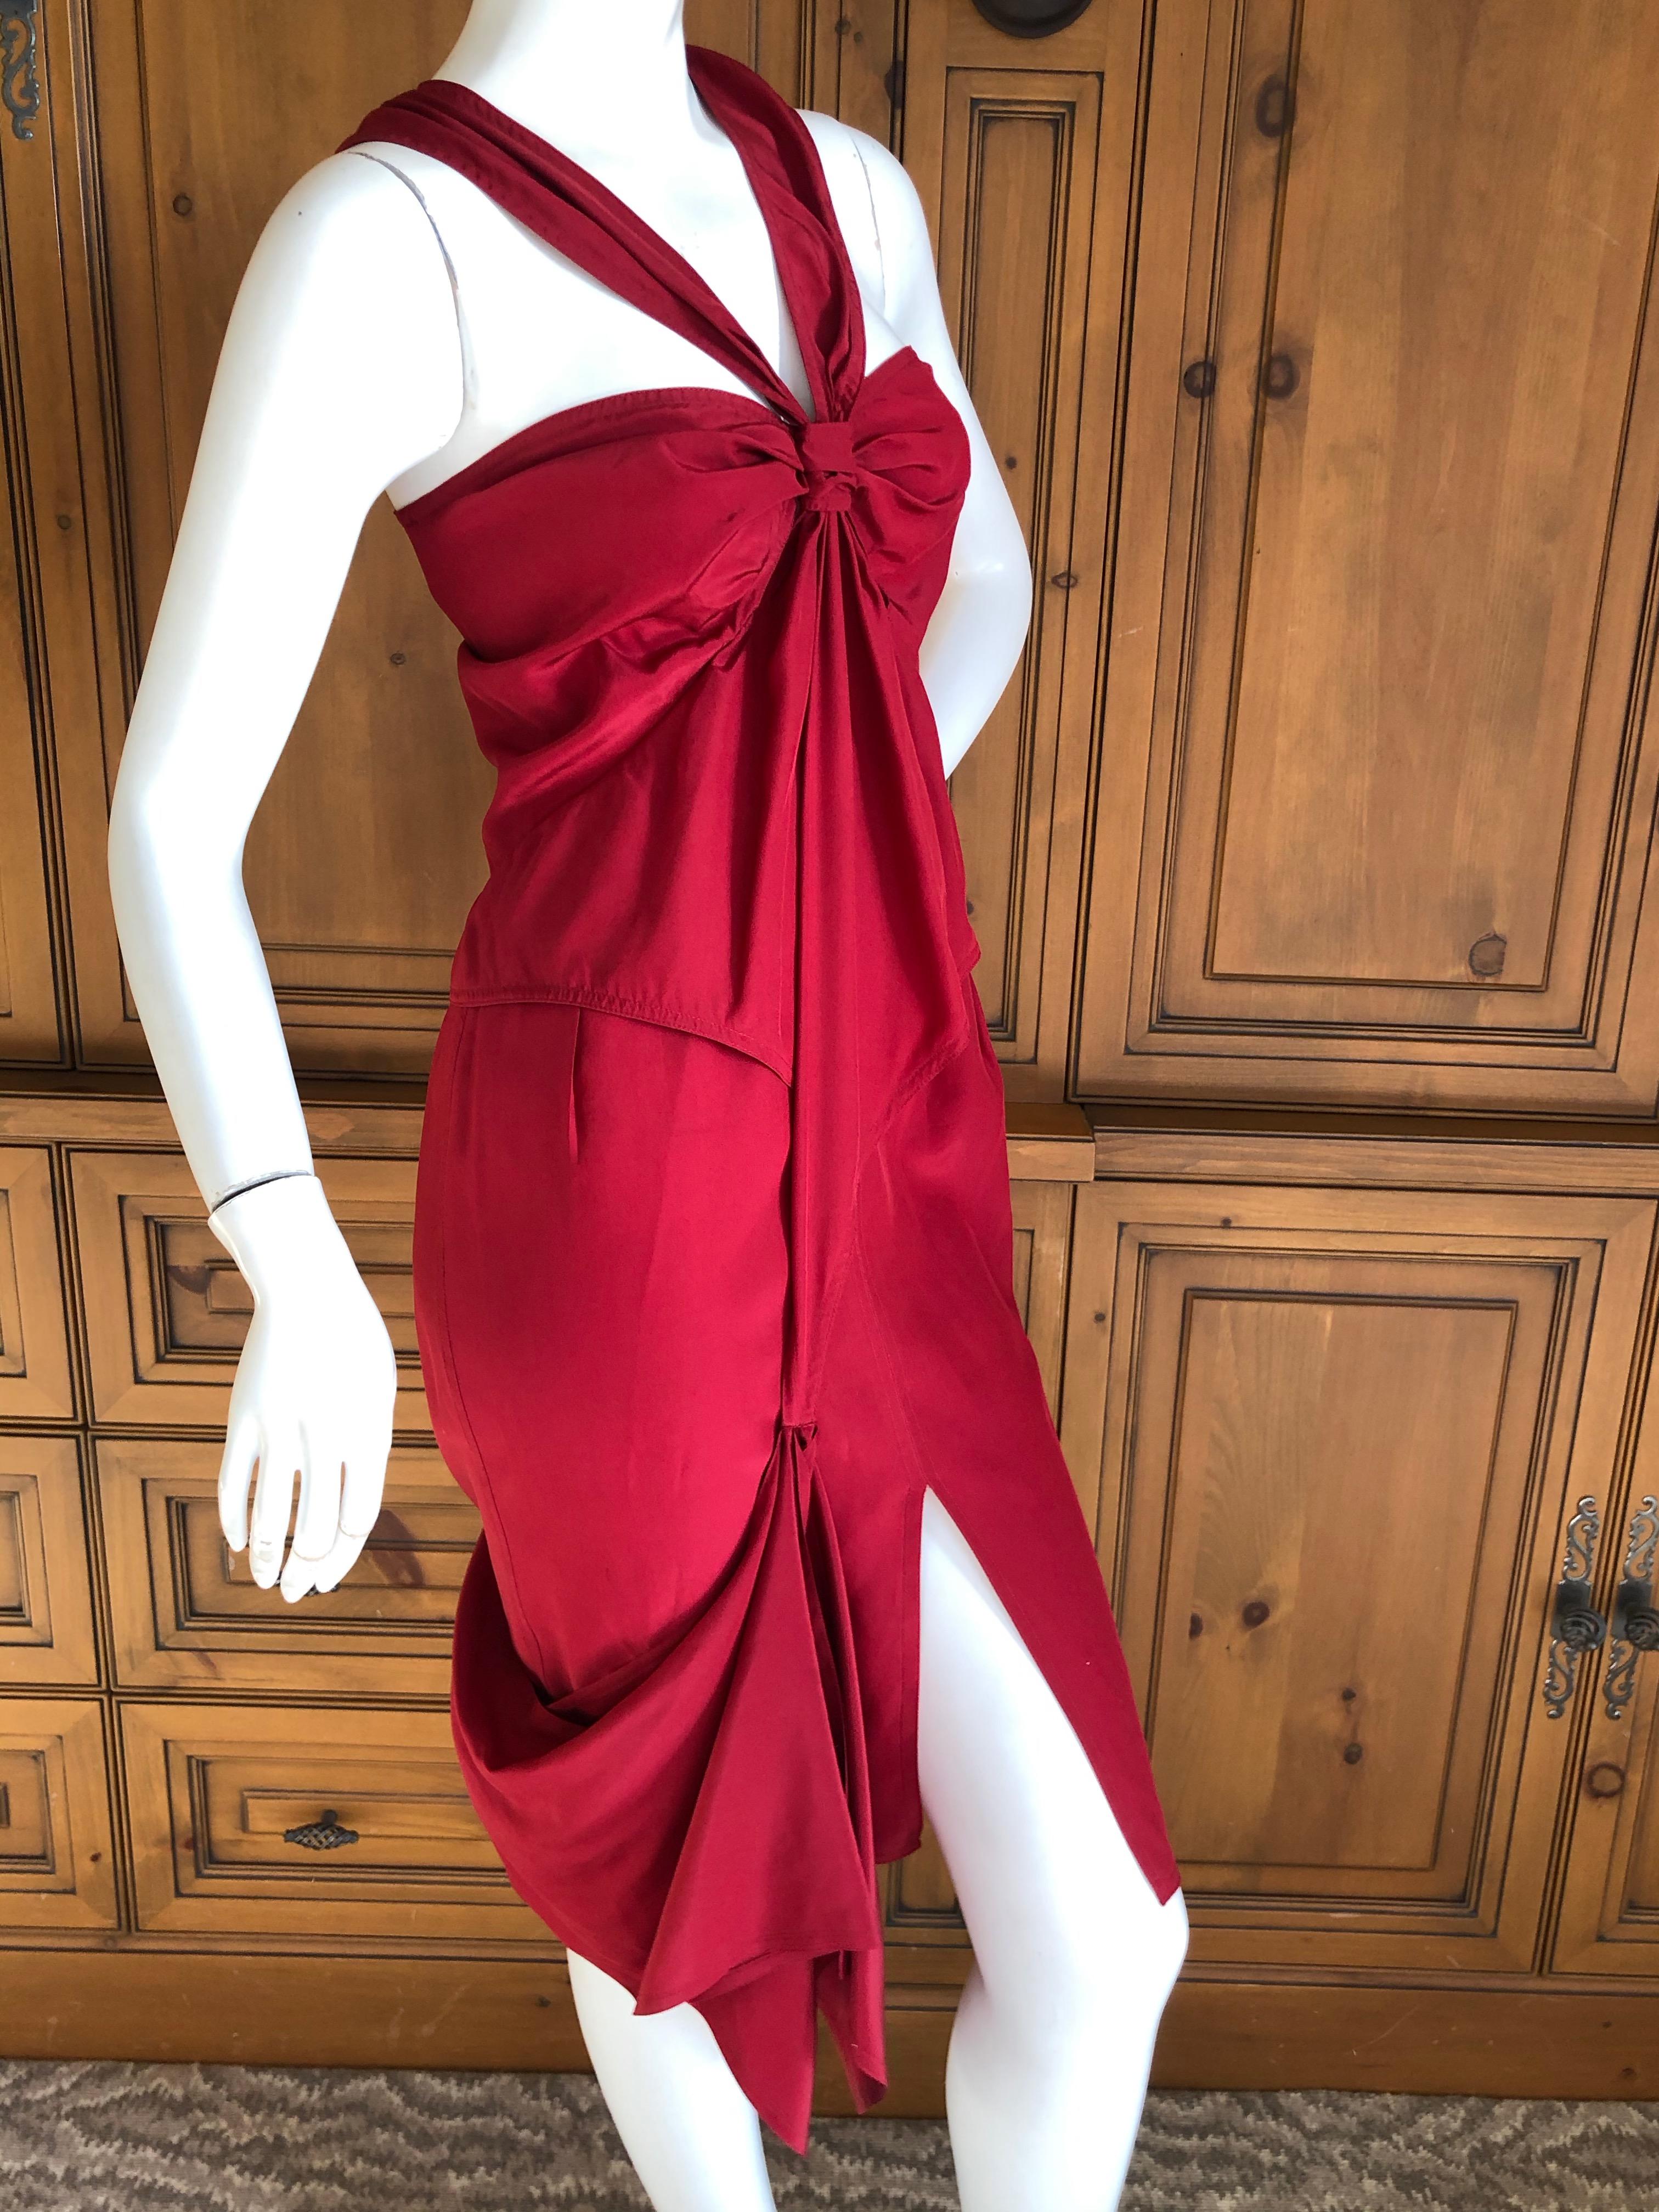 Yves Saint Laurent by Tom Ford Red Silk Keyhole Dress 2003 For Sale 1